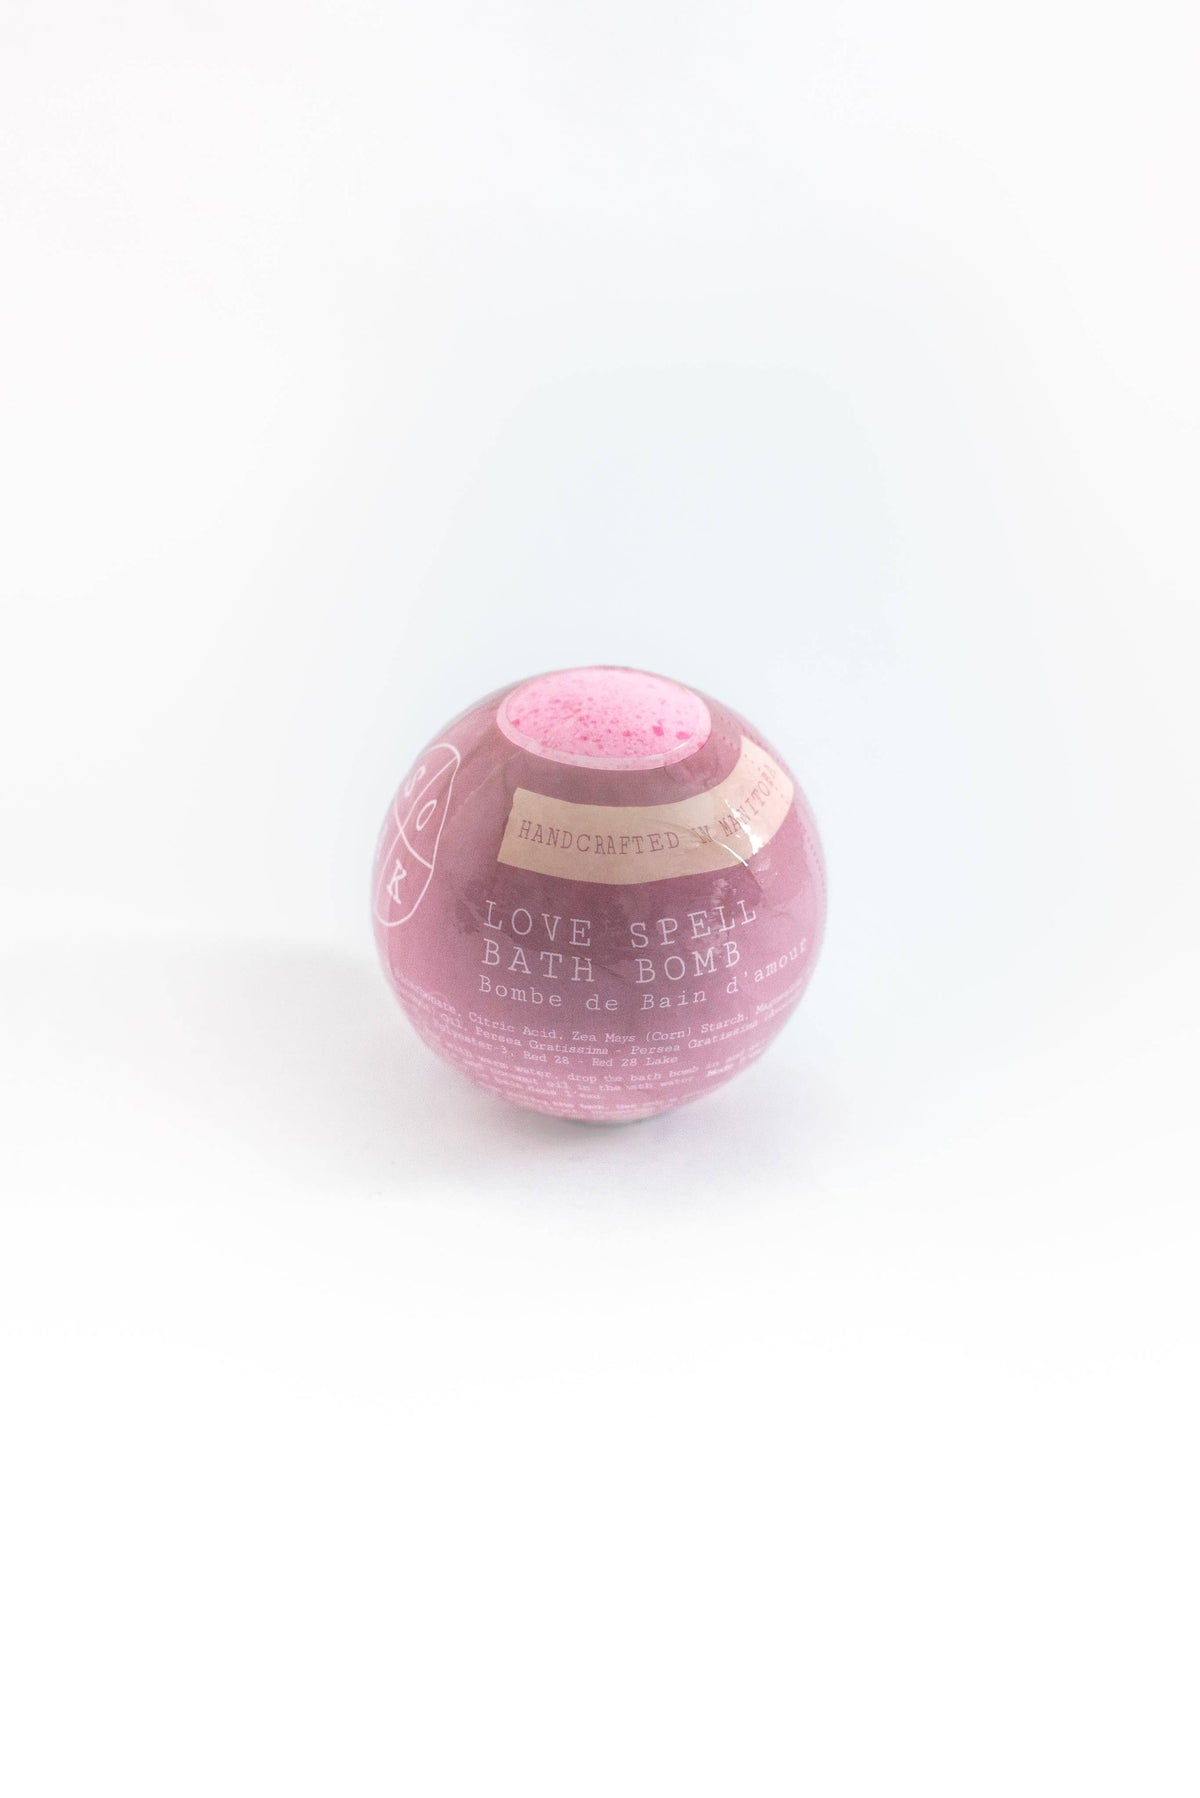 A pink, spherical "SOAK Bath Co. - Love Spell Bath Bomb" displayed against a white background. The packaging is partially transparent shrink wrap and features textual information.